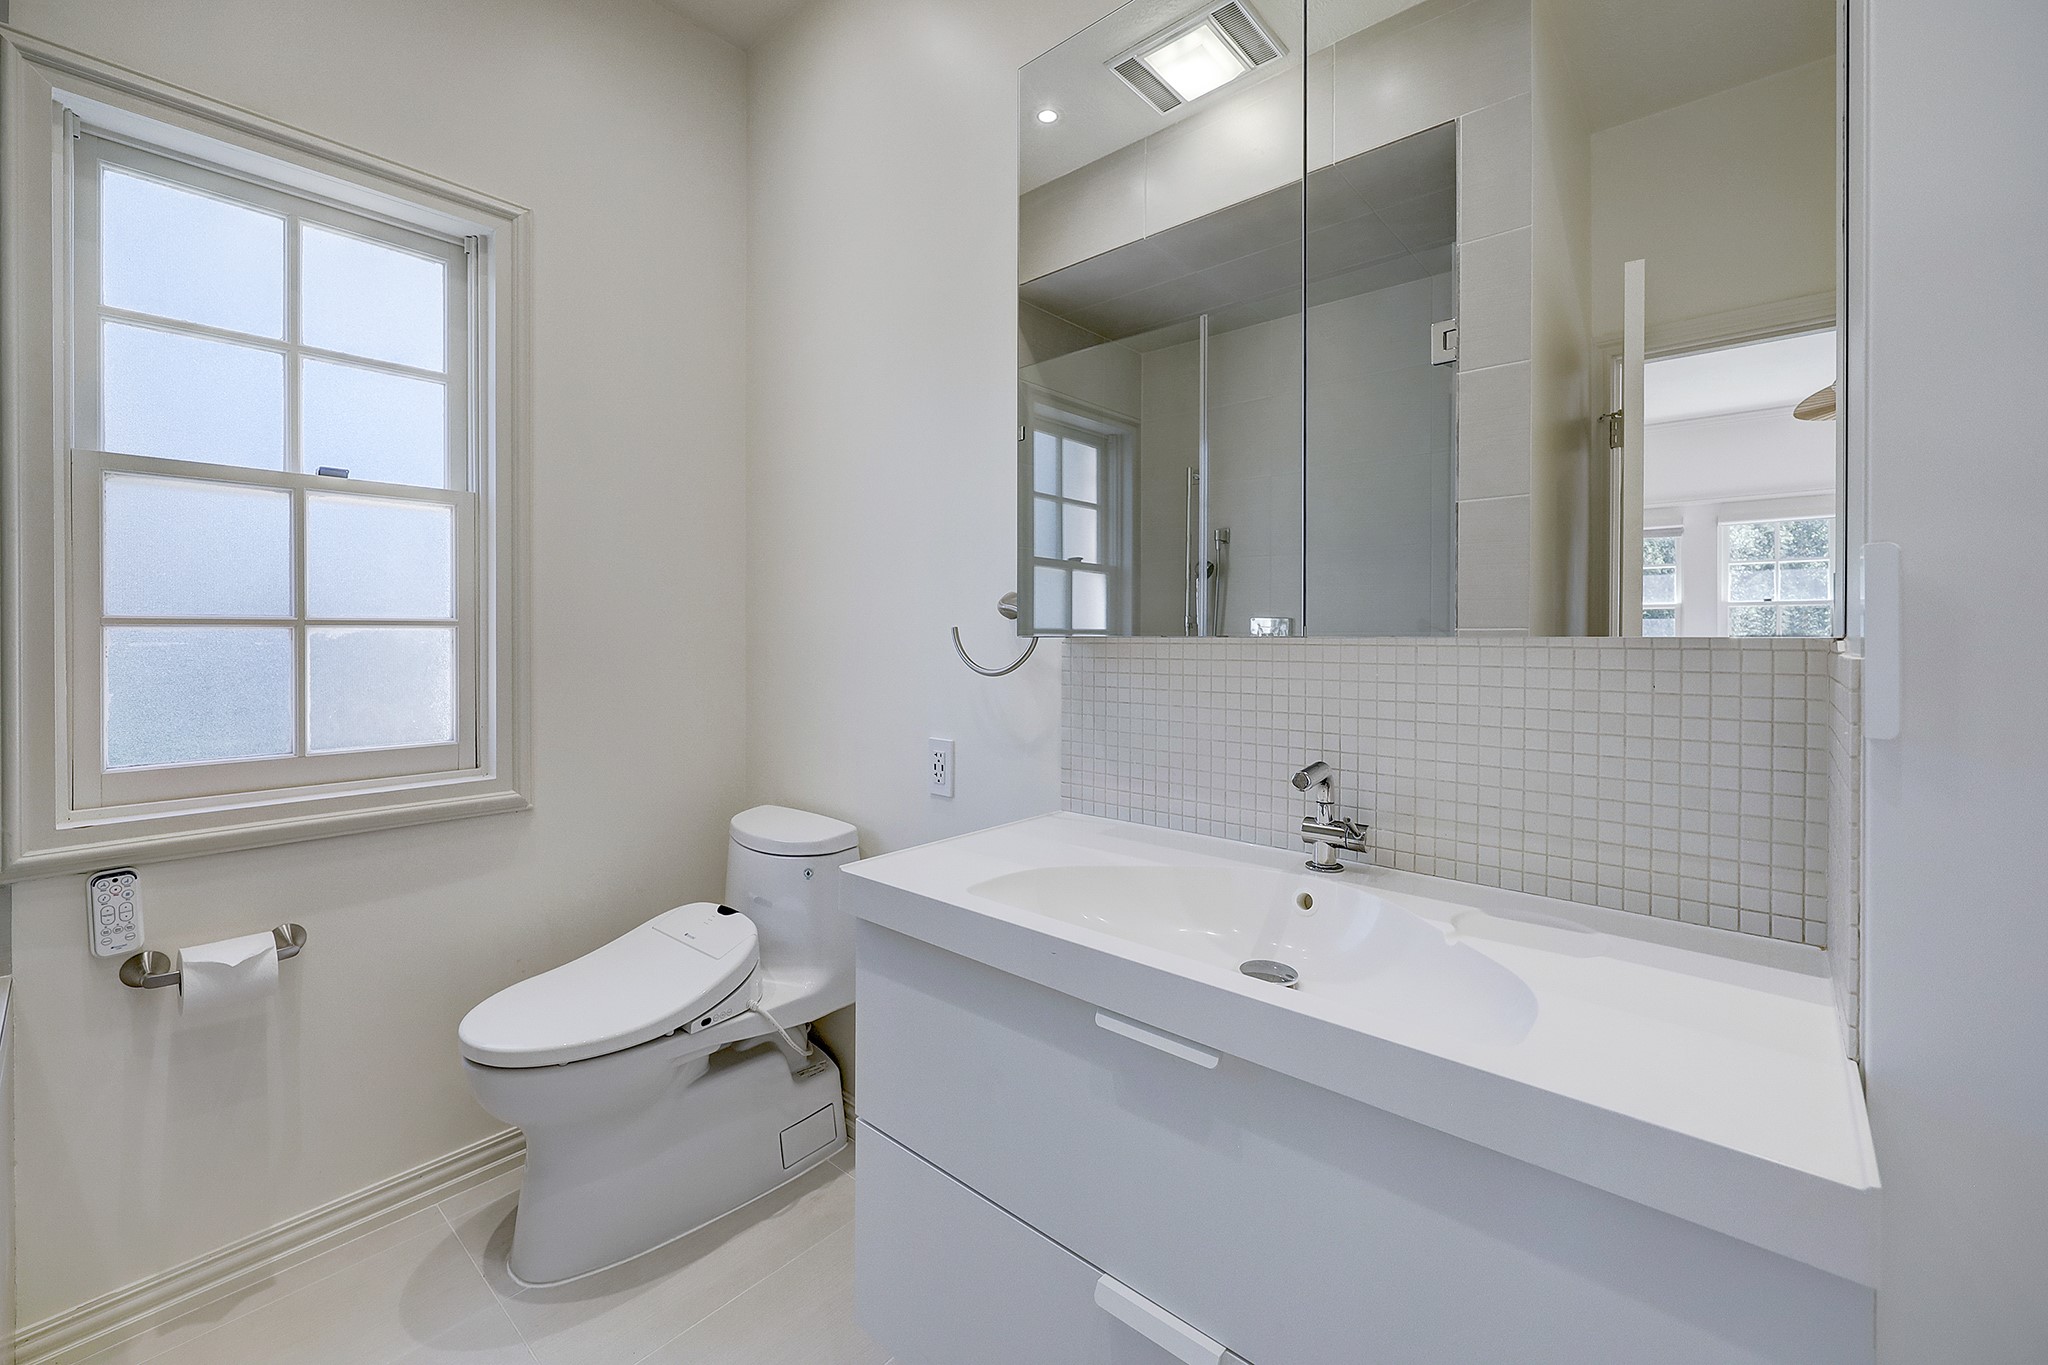 Remodeled en suite bath with clean lines and shower